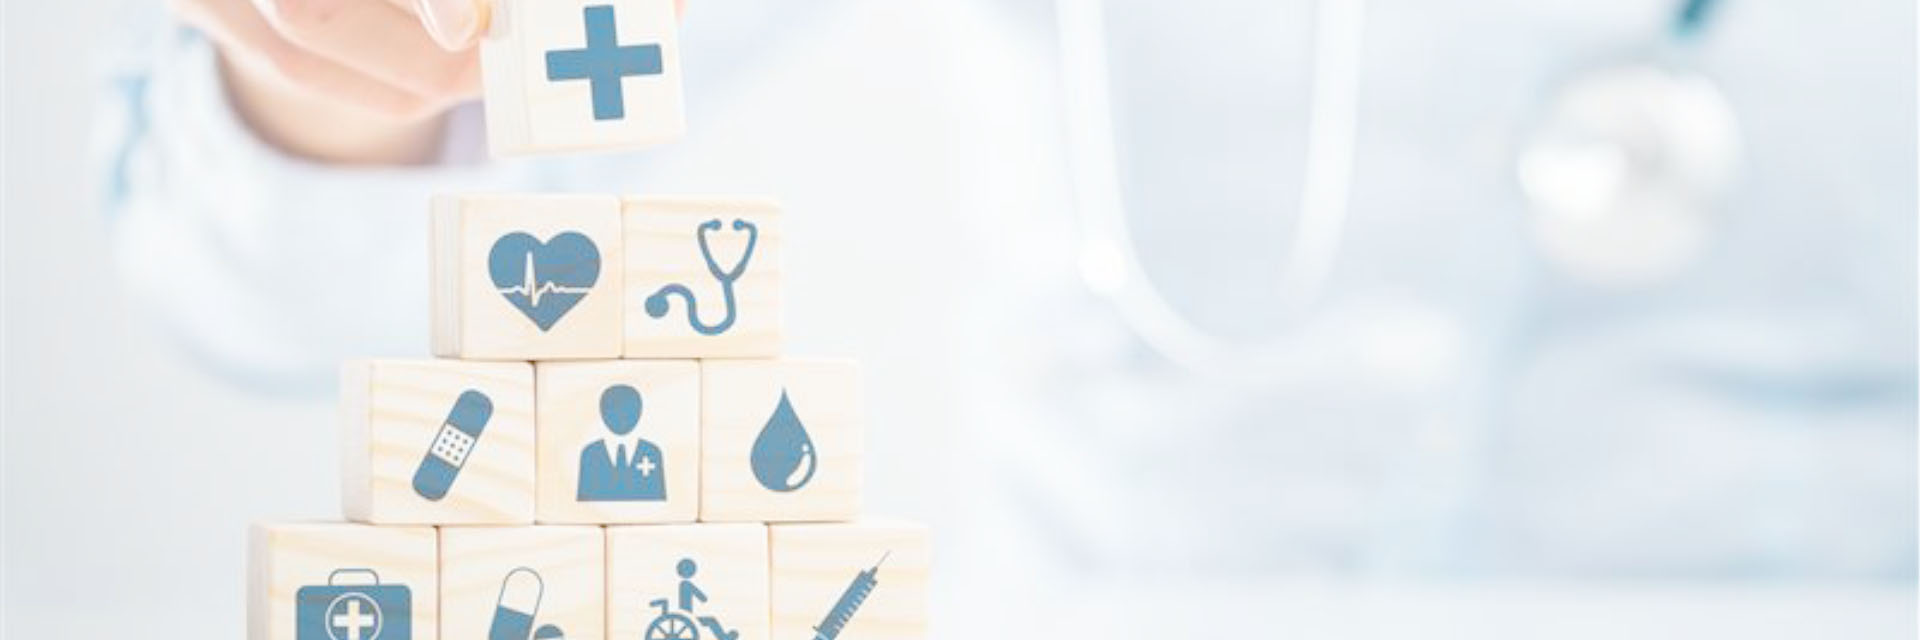 Image of a doctor building blocks with medical icons printed on them